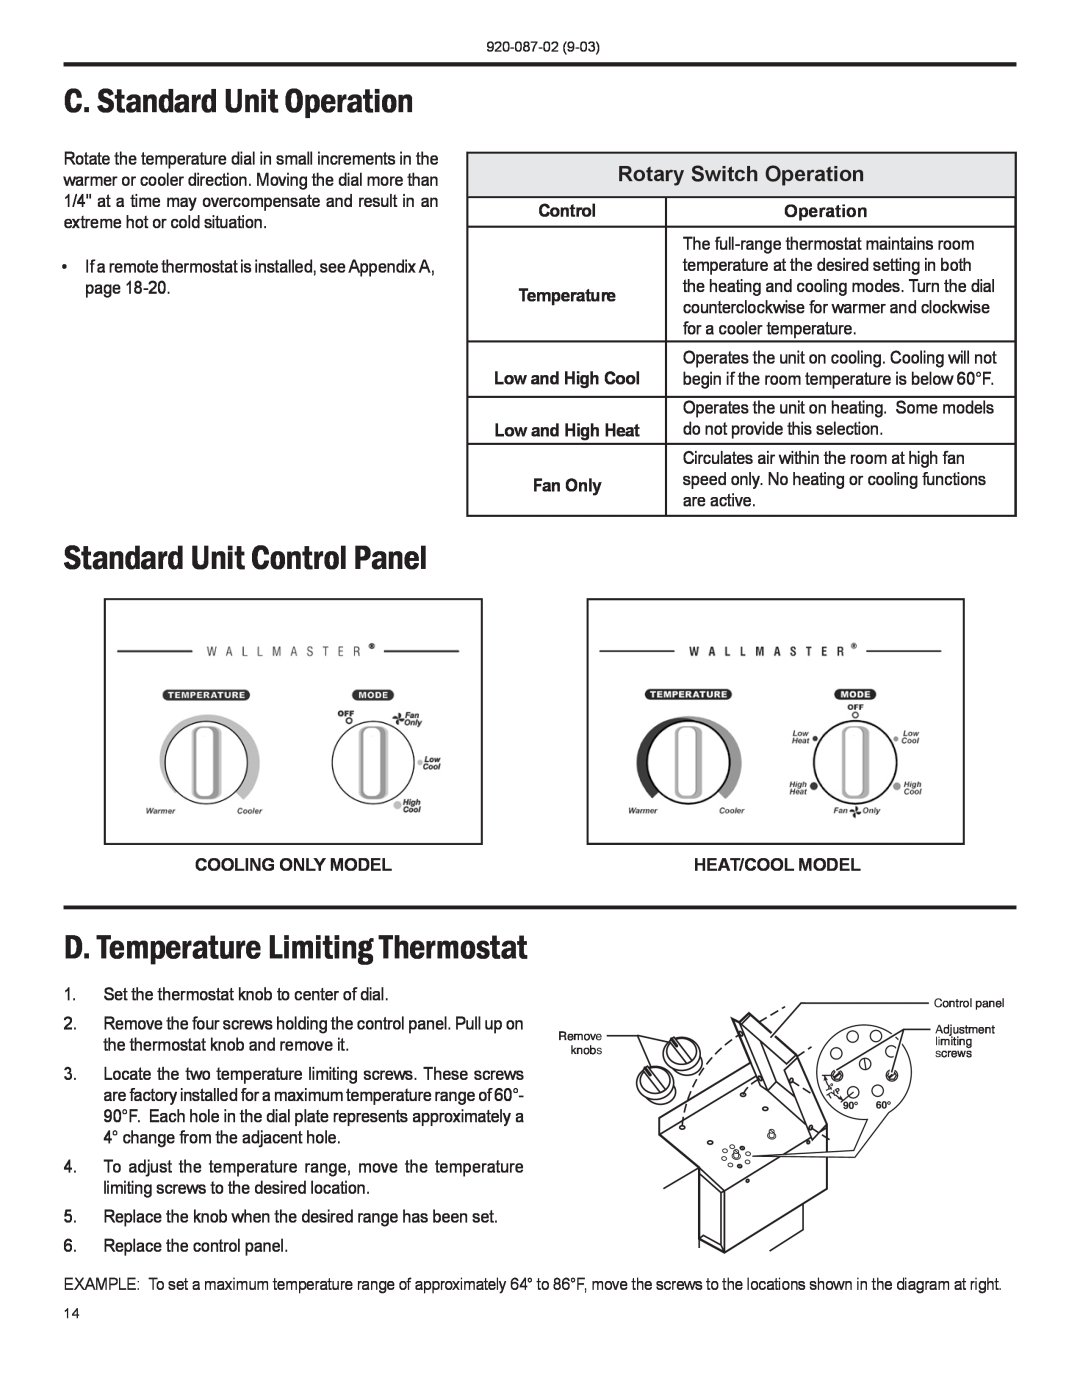 Friedrich PTAC operation manual C. Standard Unit Operation, Standard Unit Control Panel, D. Temperature Limiting Thermostat 